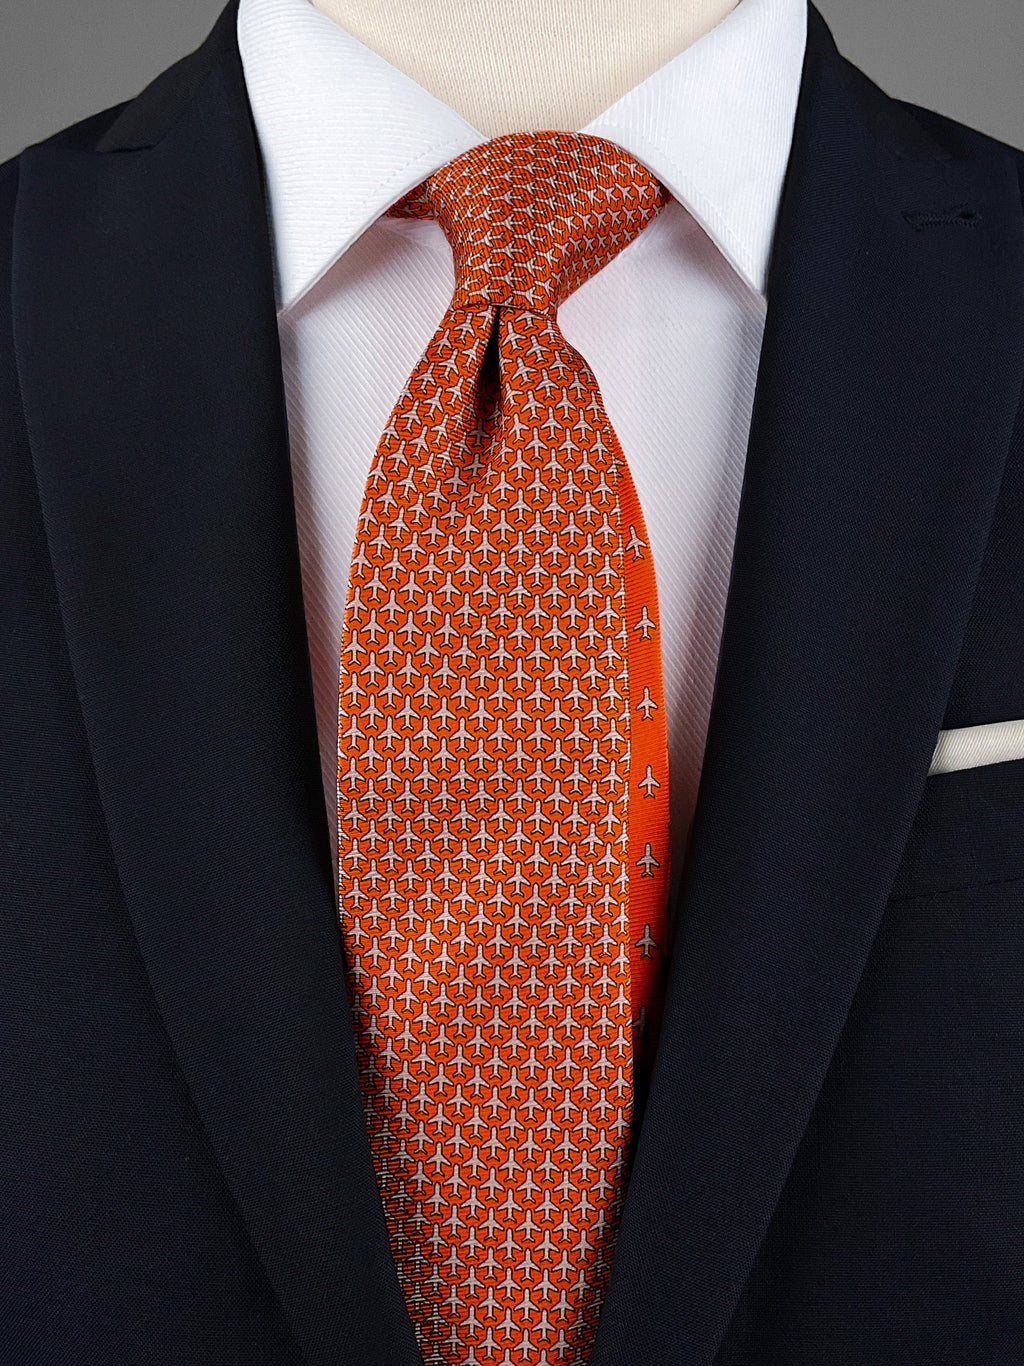 Orange mulberry silk twill tie with a airplane microprint pattern in a pink shade worn with a white shirt and a navy blue suit